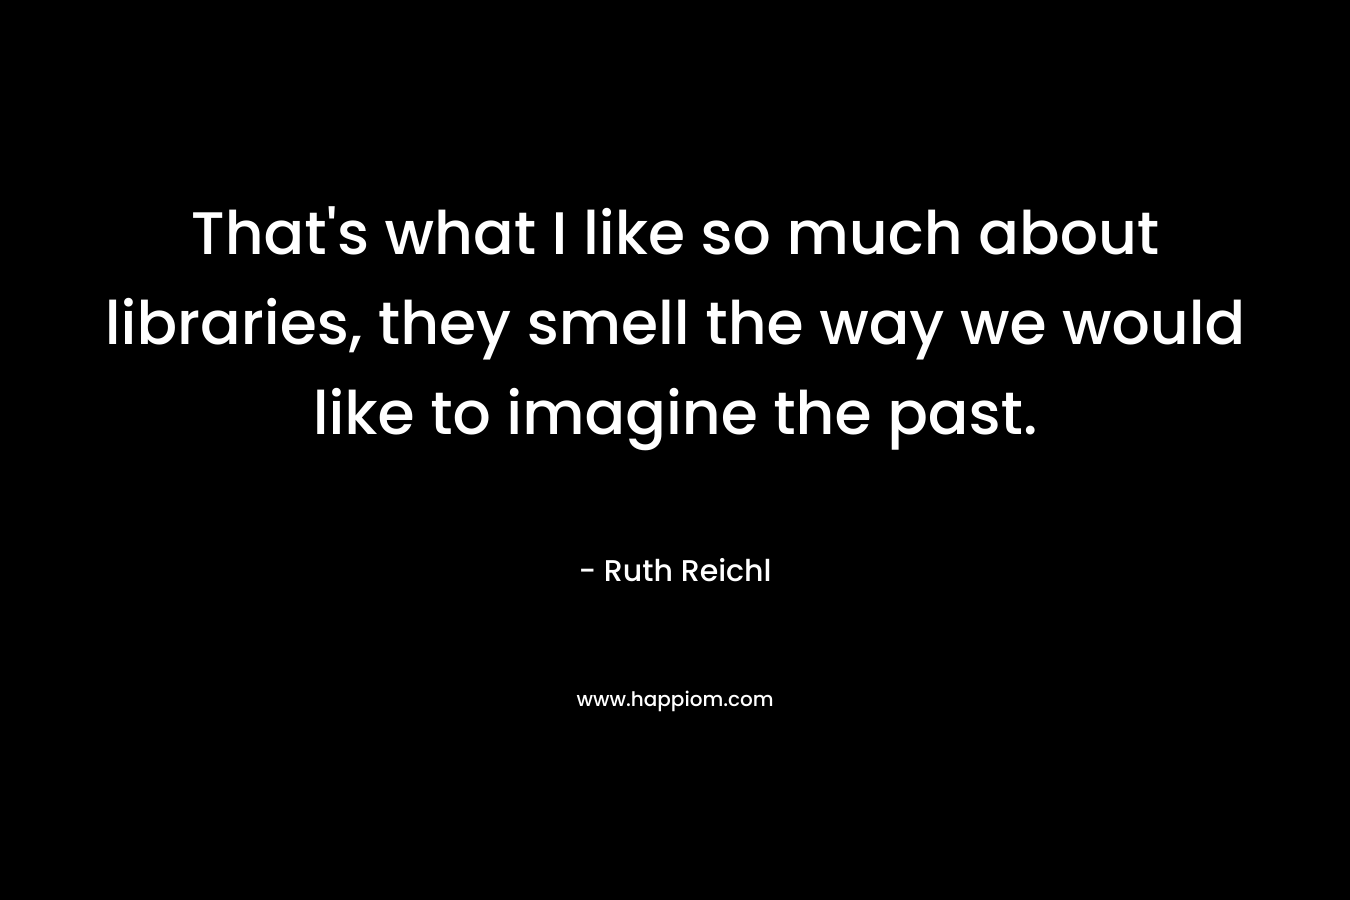 That’s what I like so much about libraries, they smell the way we would like to imagine the past. – Ruth Reichl